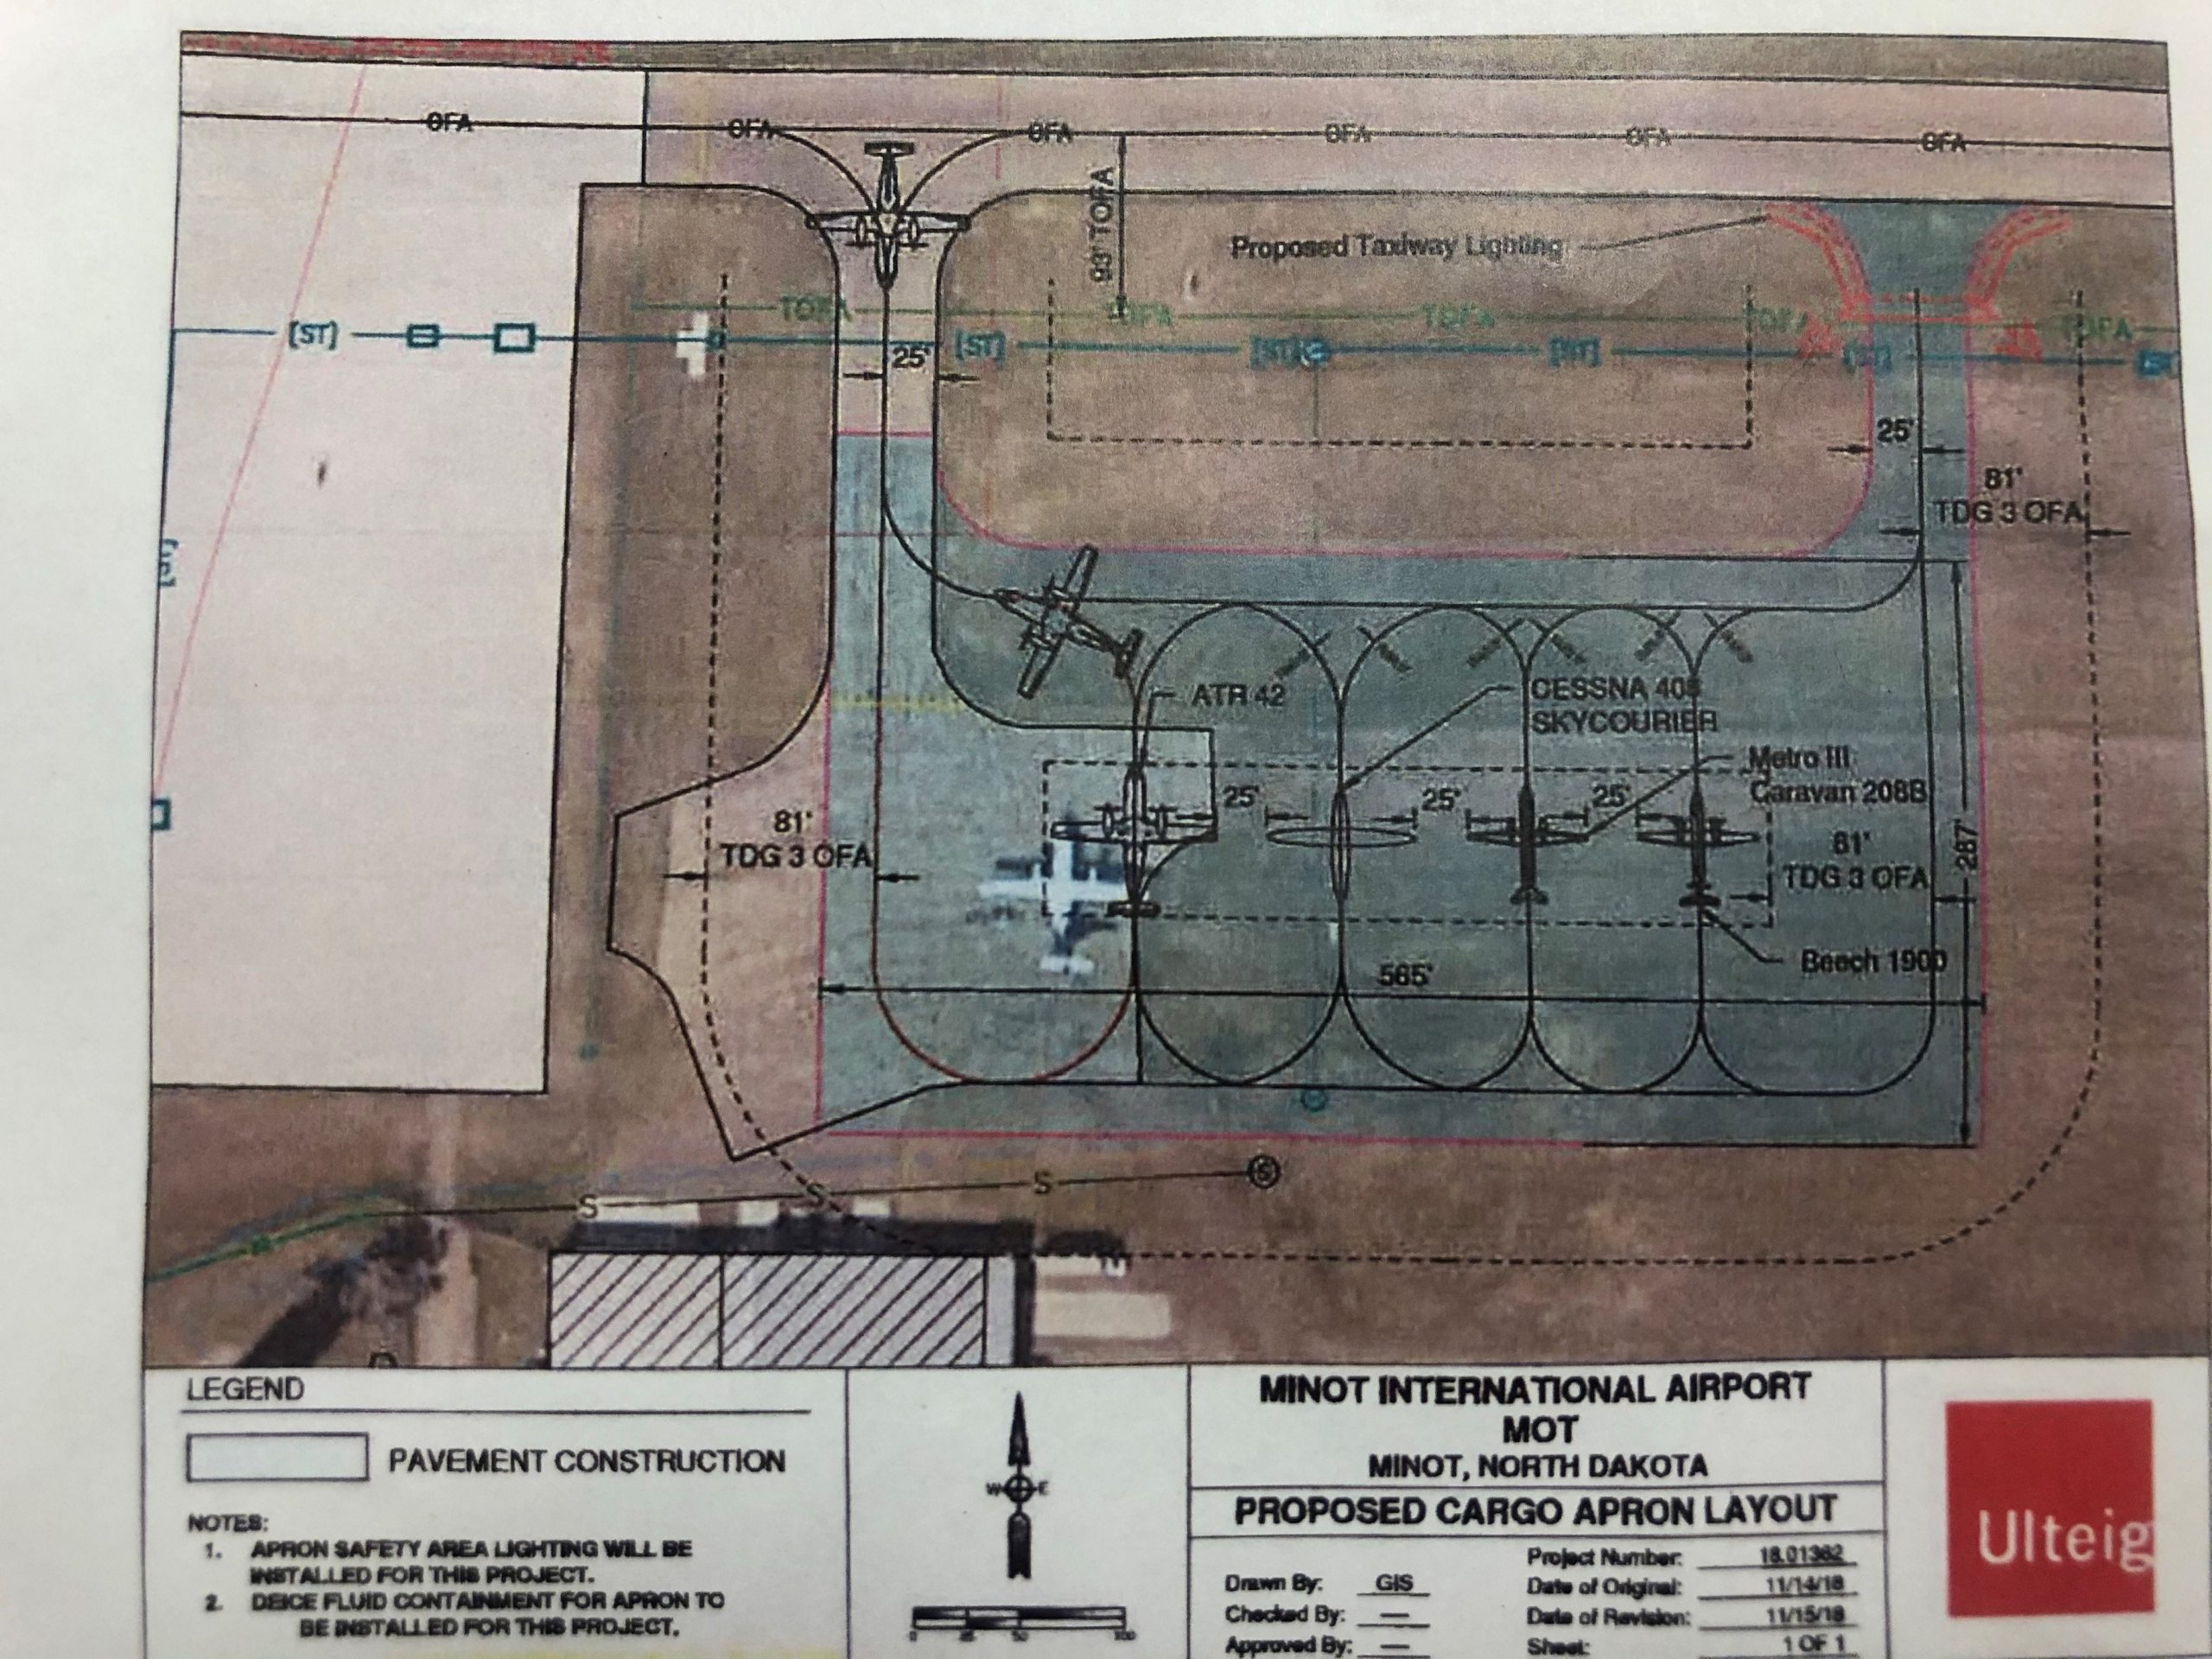 Minot Airport one step closer to completing upgrades to cargo apron, taxiway